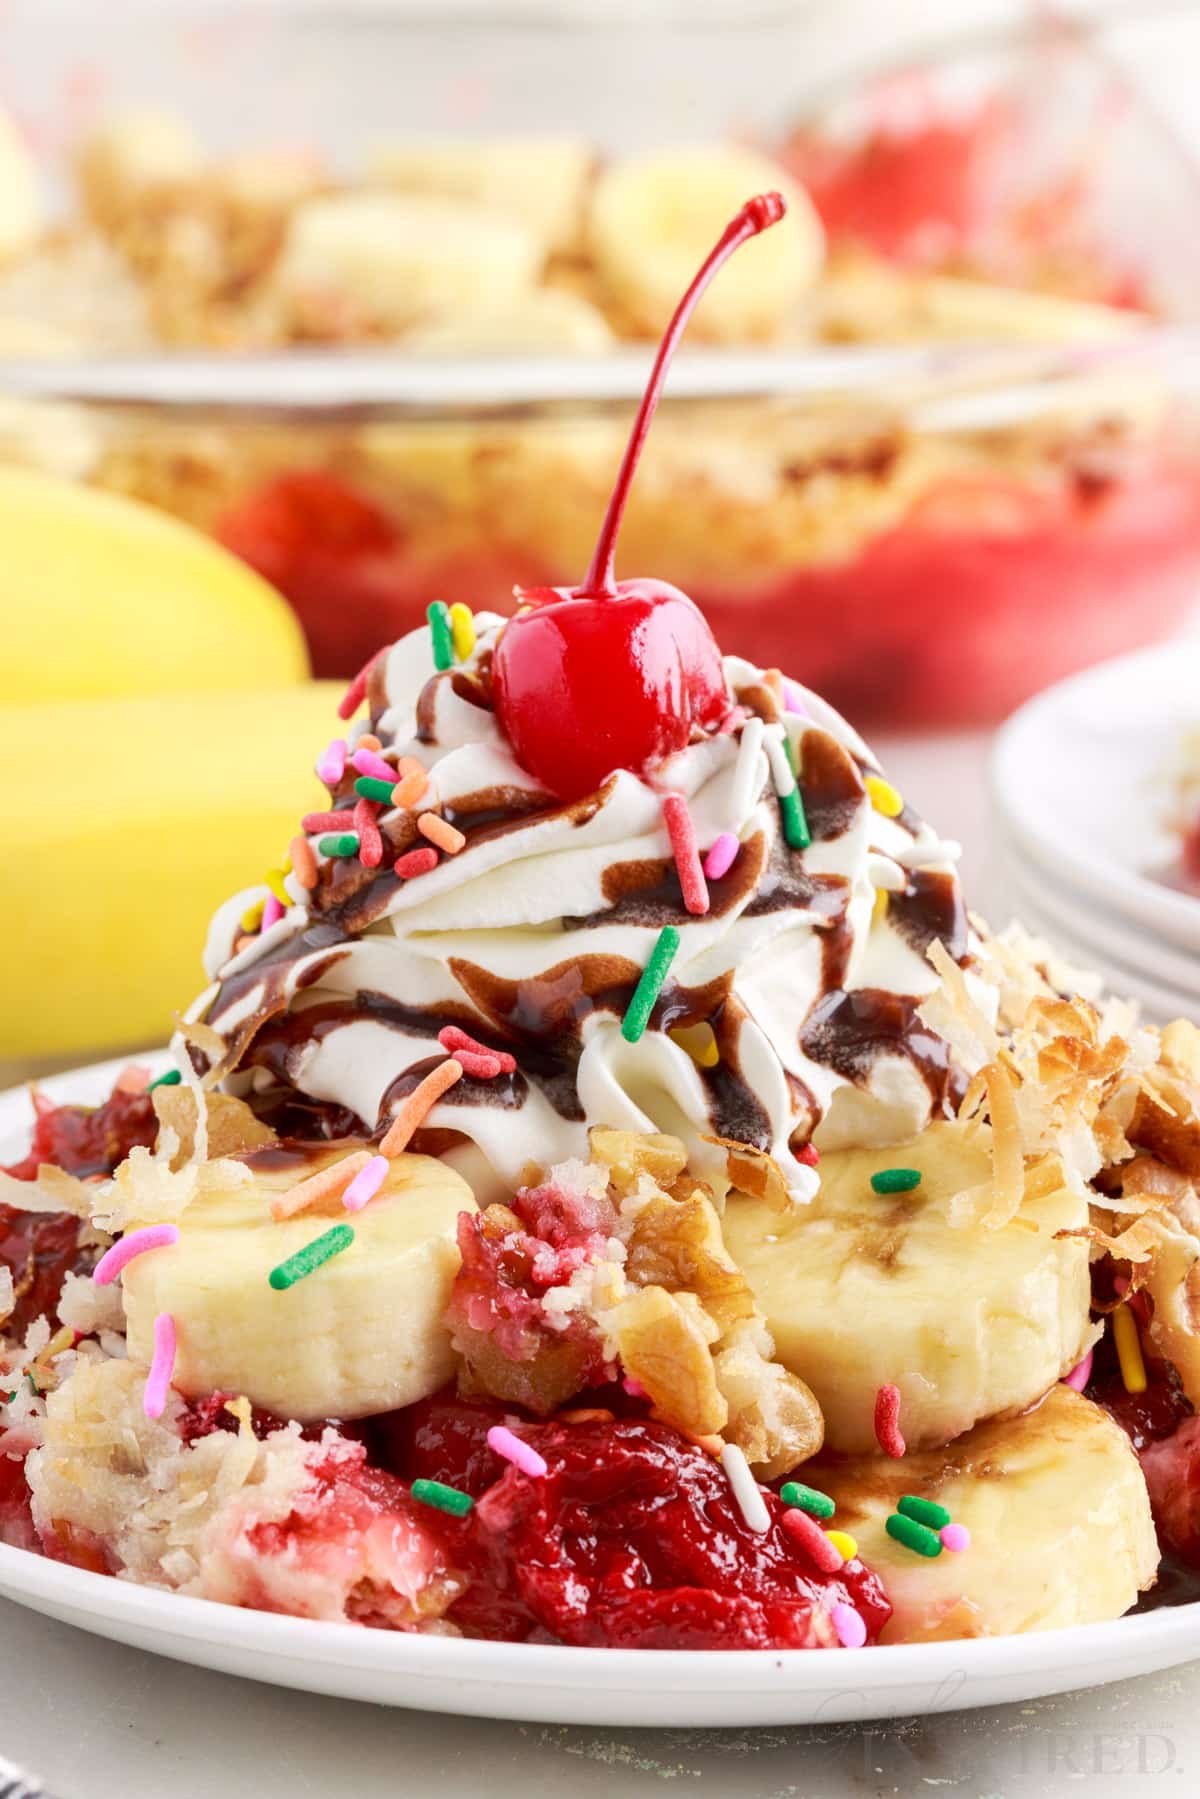 Whipped topping and cherry added to a plate full of banana split dump cake.